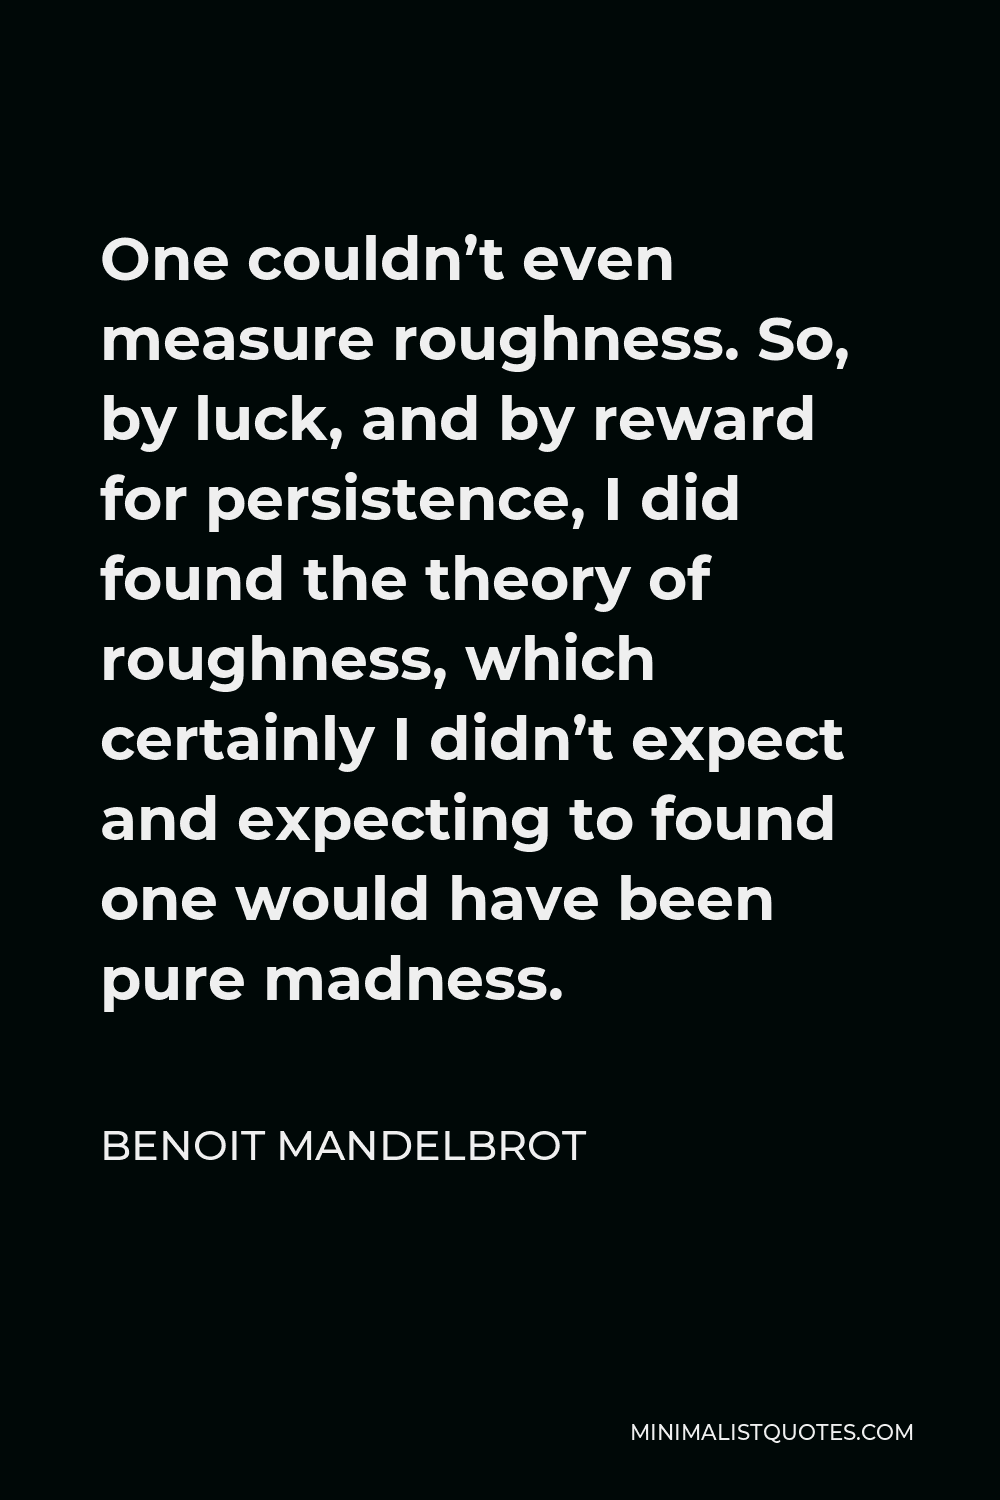 Benoit Mandelbrot Quote - One couldn’t even measure roughness. So, by luck, and by reward for persistence, I did found the theory of roughness, which certainly I didn’t expect and expecting to found one would have been pure madness.